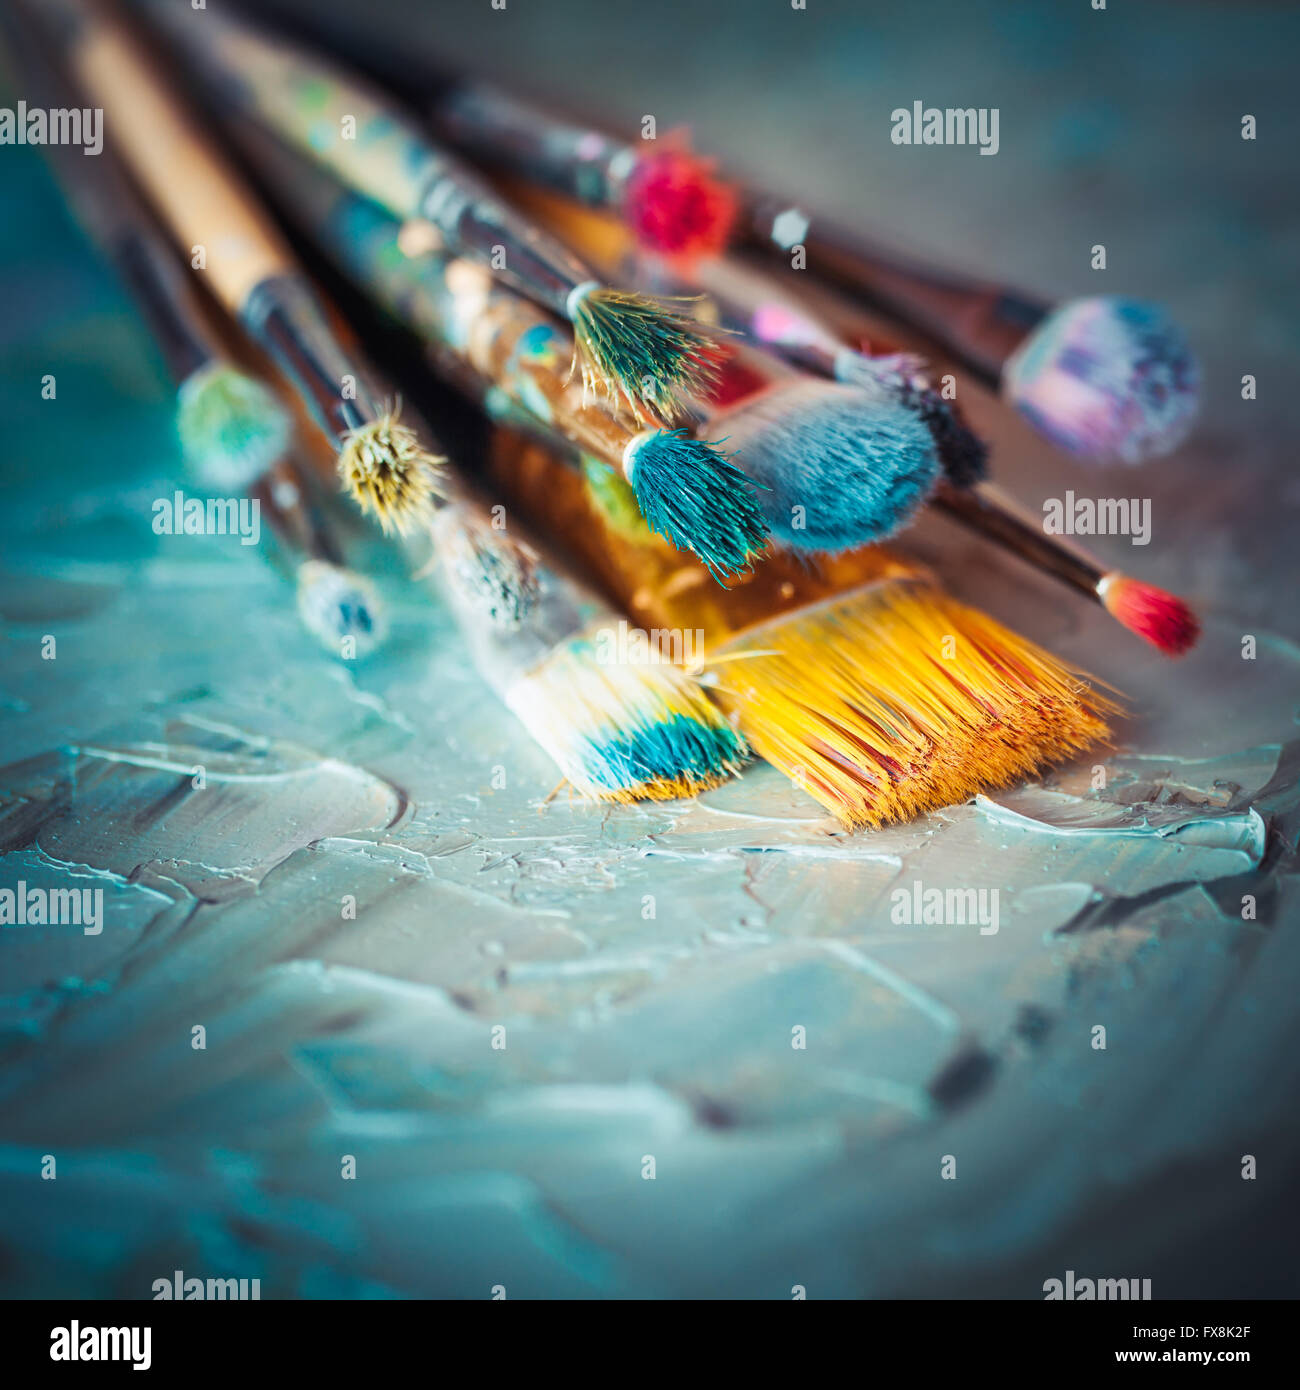 Paintbrushes on artist canvas covered with oil paints. Retro styled. Stock Photo